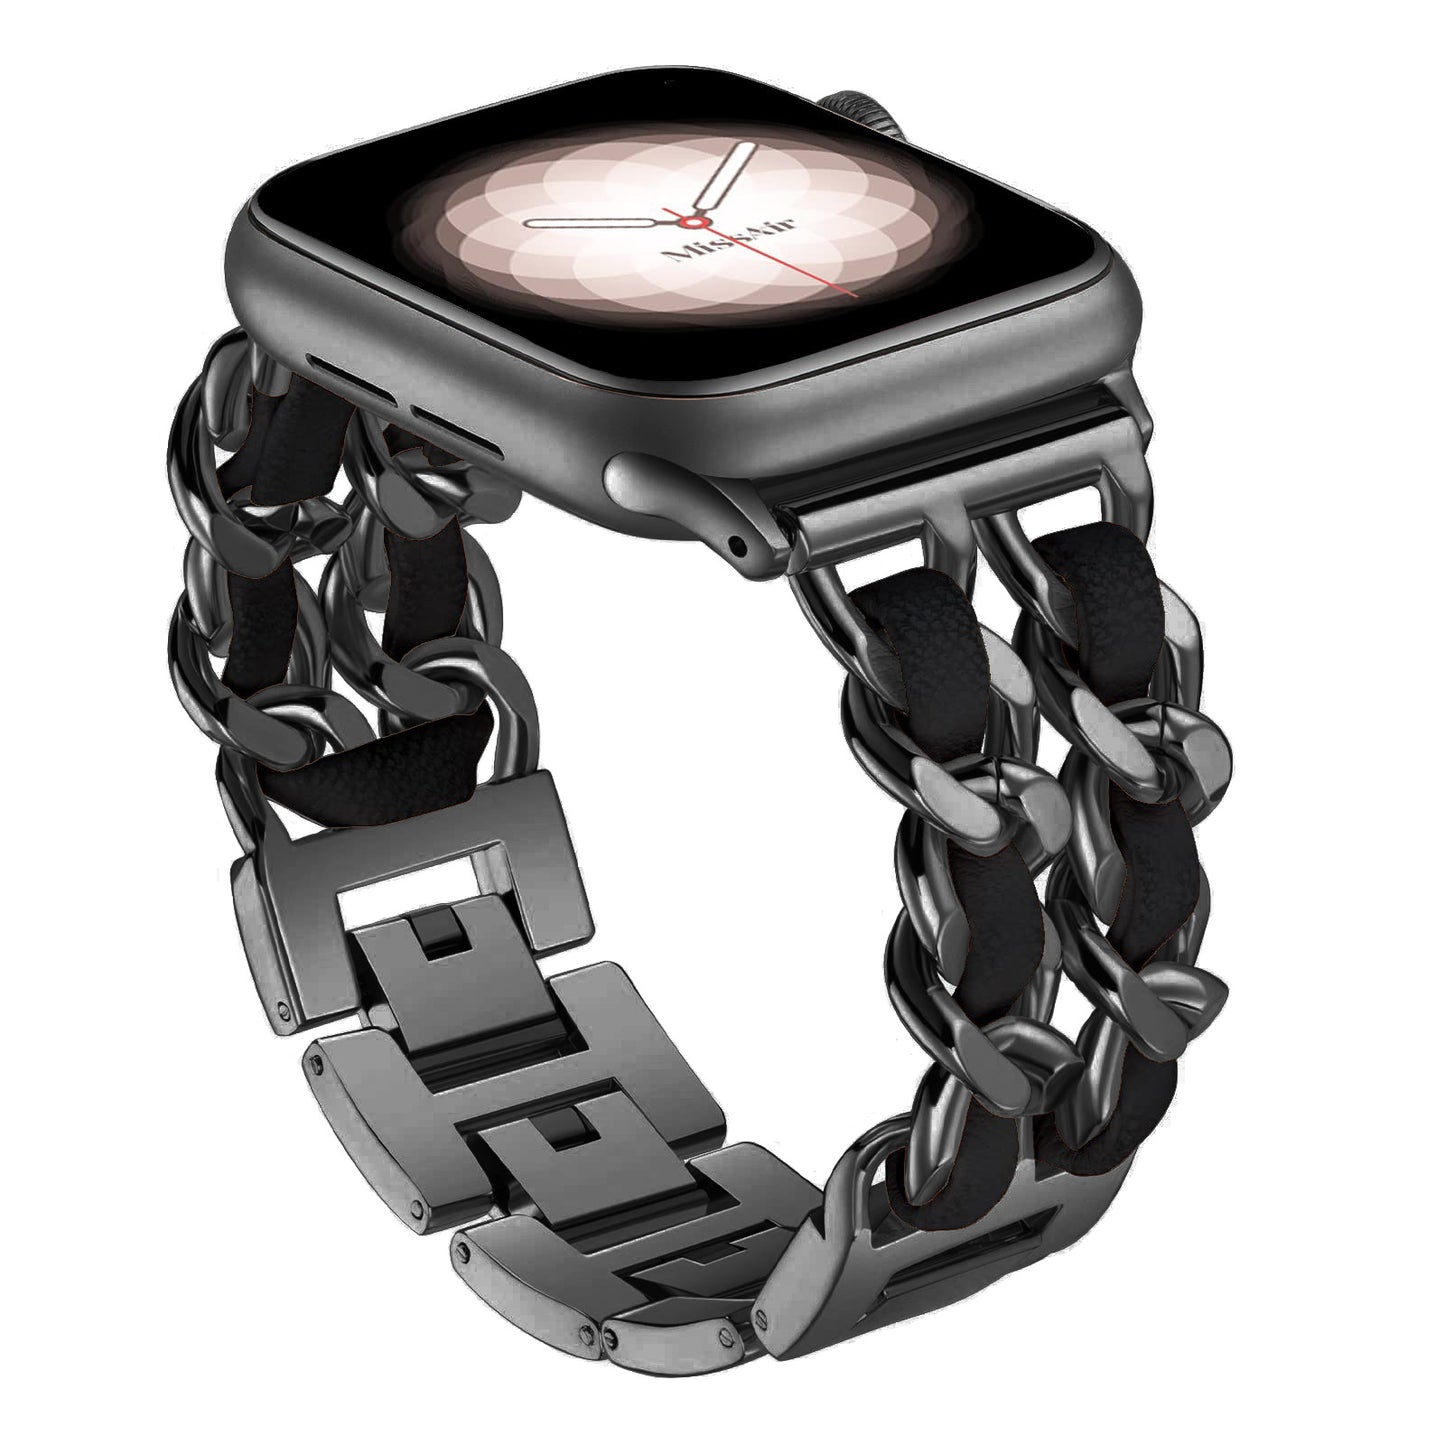 Apple Watch Metal strap IWATCH 1-8 Watch with stainless steel double chain leather watch strap